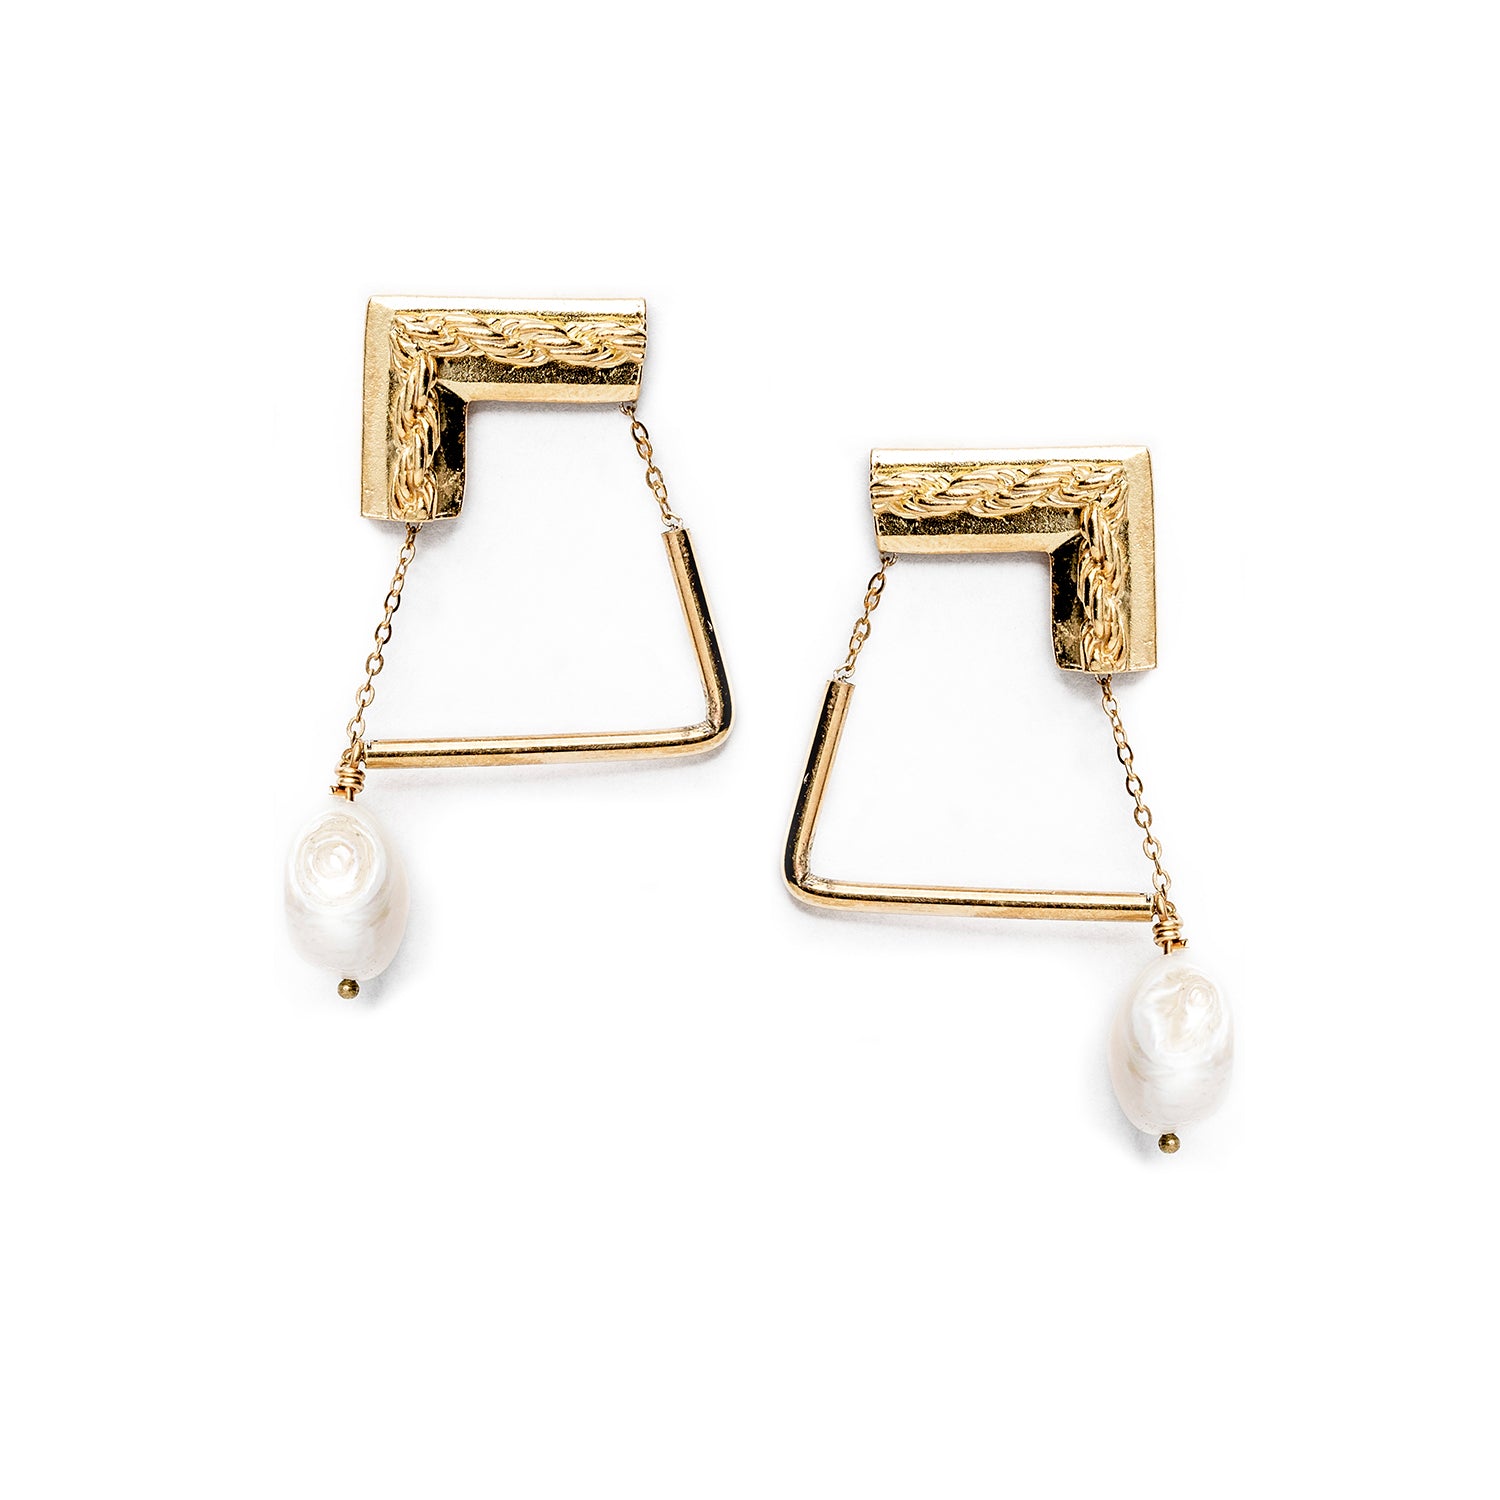 Shimoda Statement Earrings in Silver and Baroque Pearls